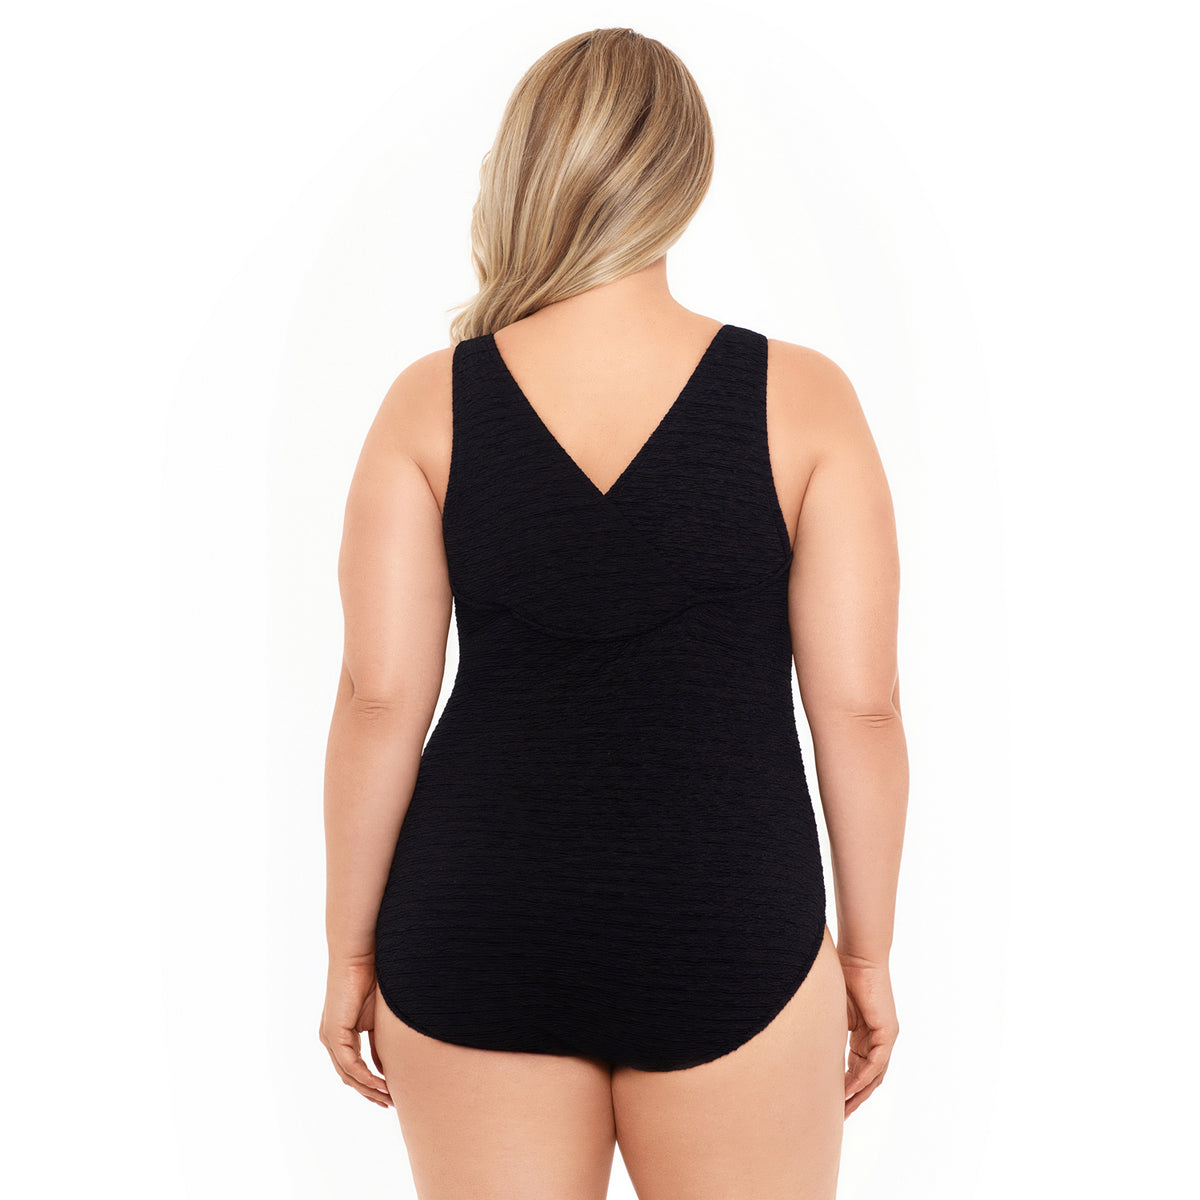 Krinkle Chlorine Resistant Swimsuit with Active Back - Black